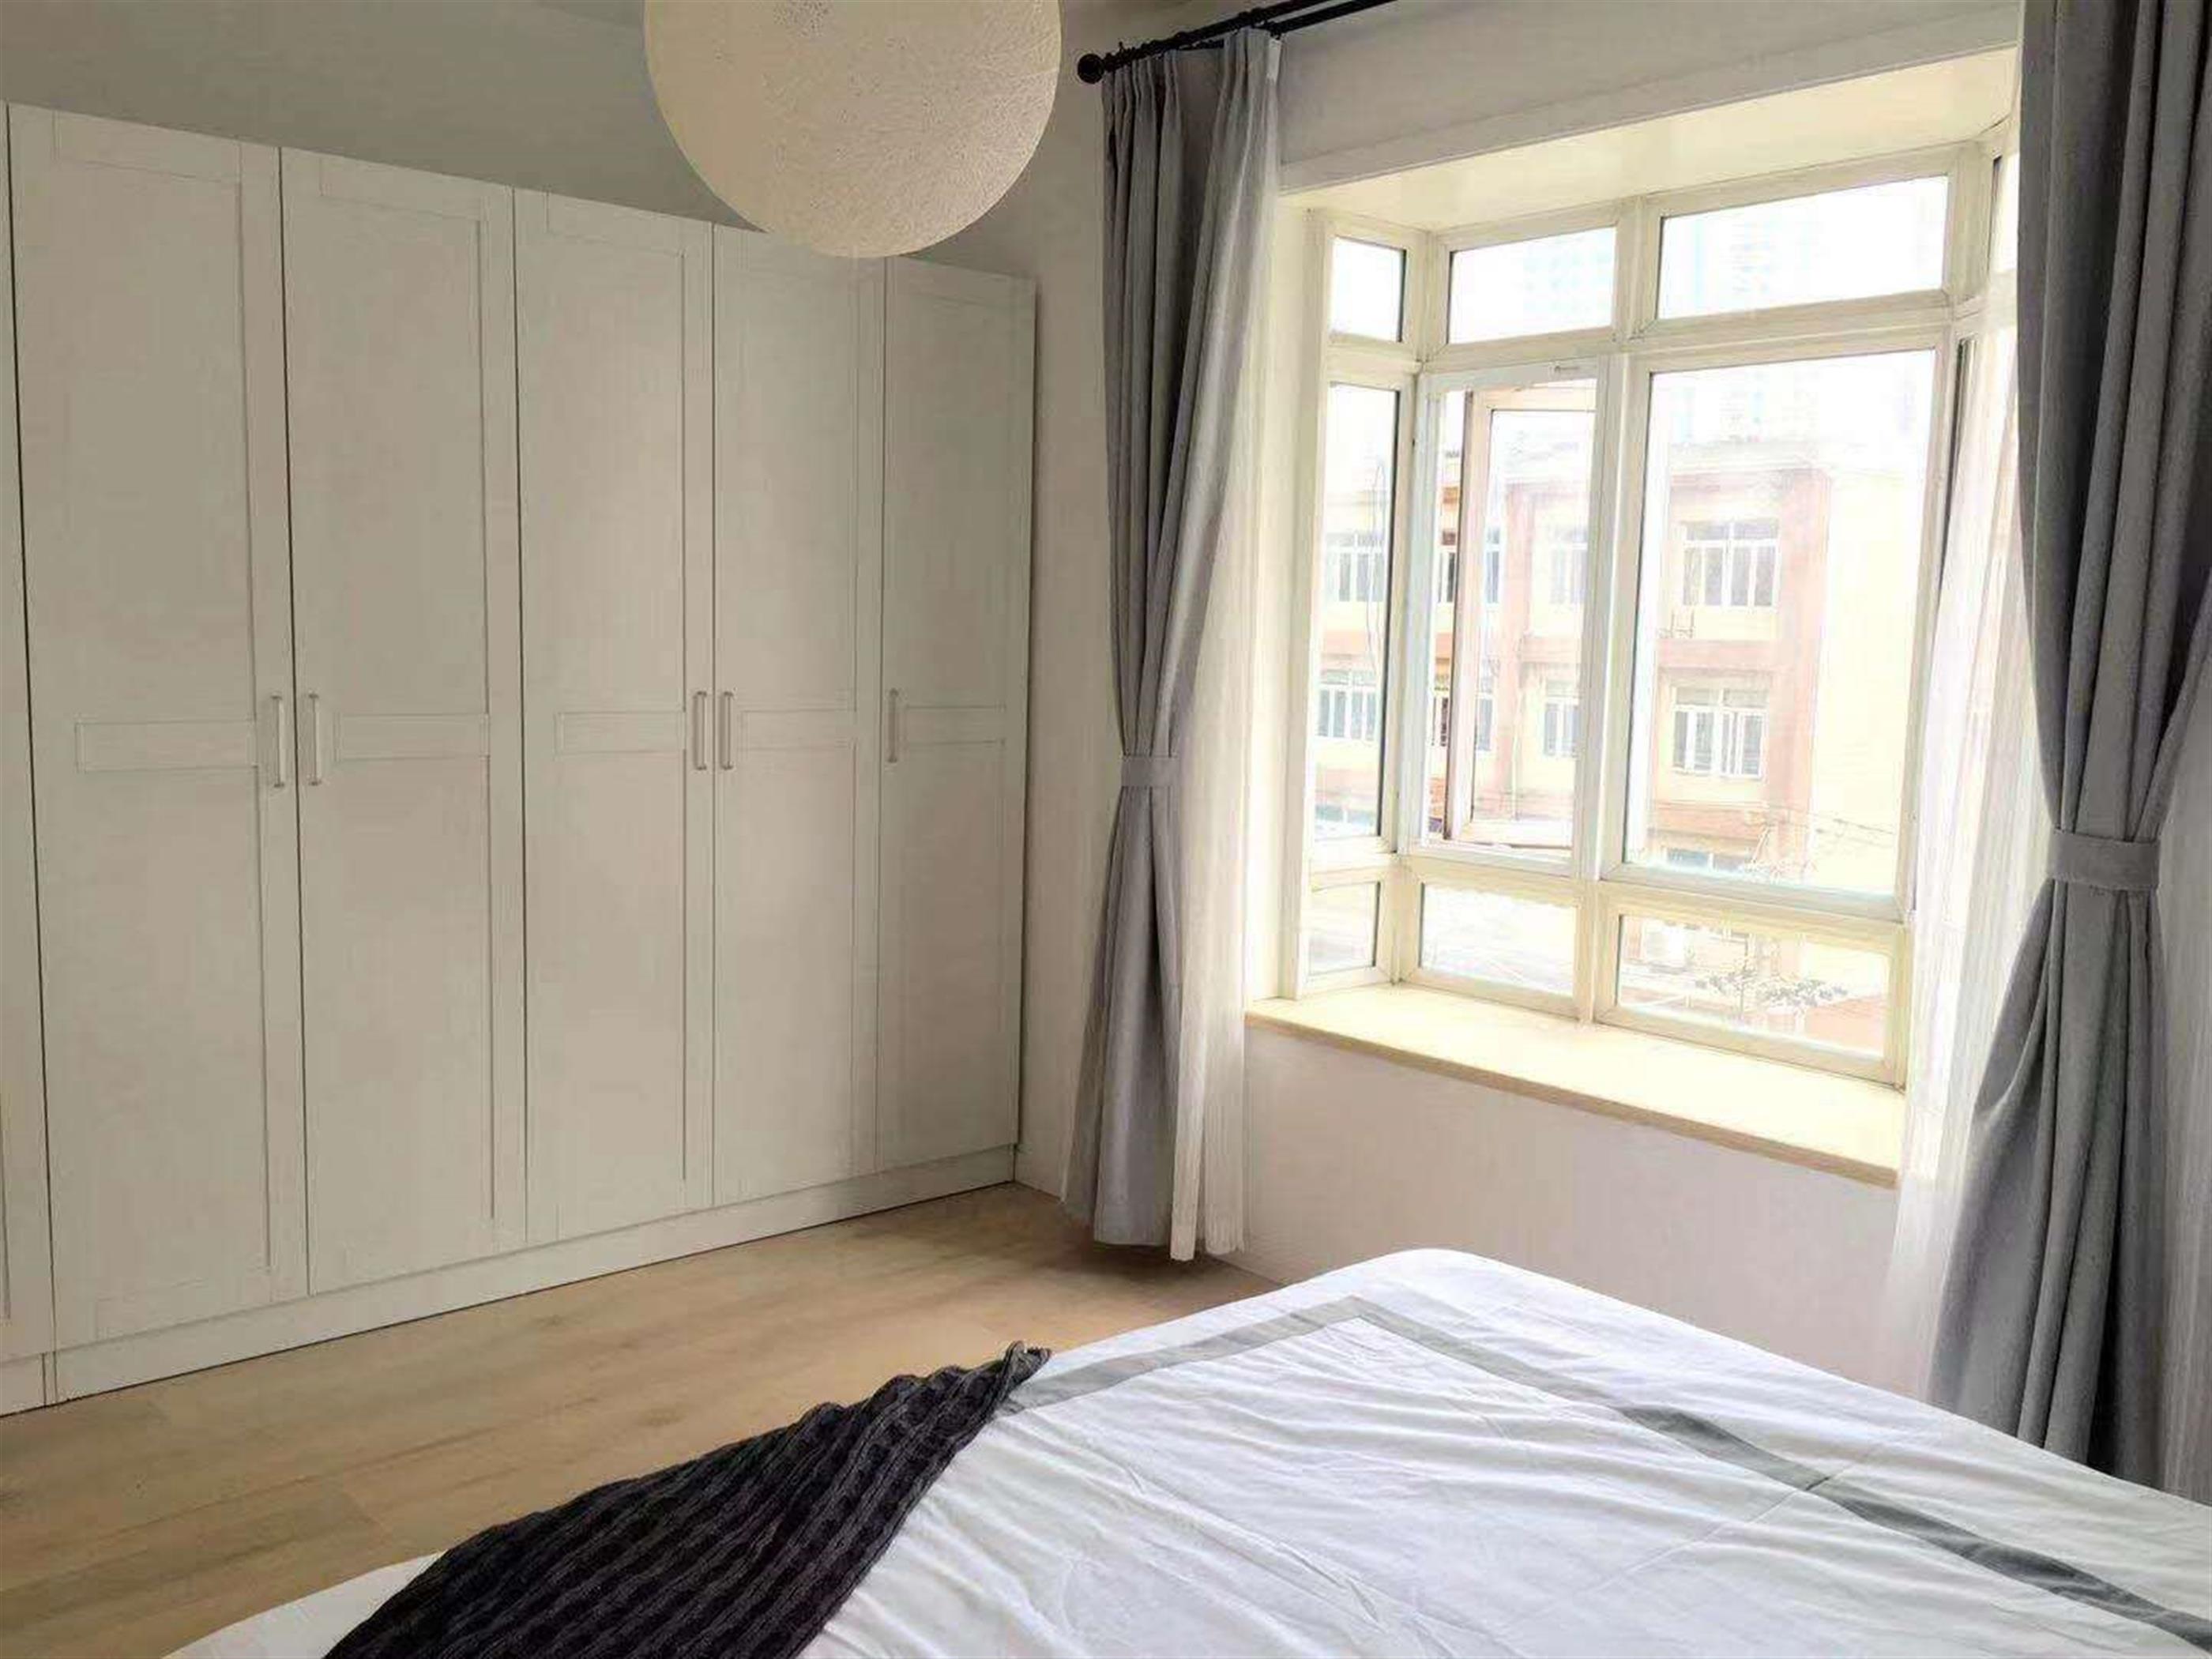 bright windows Convenient Newly-Renovated 2BR FFC Xinghua Rd Apt Nr LN 10/11 for Rent in Shanghai